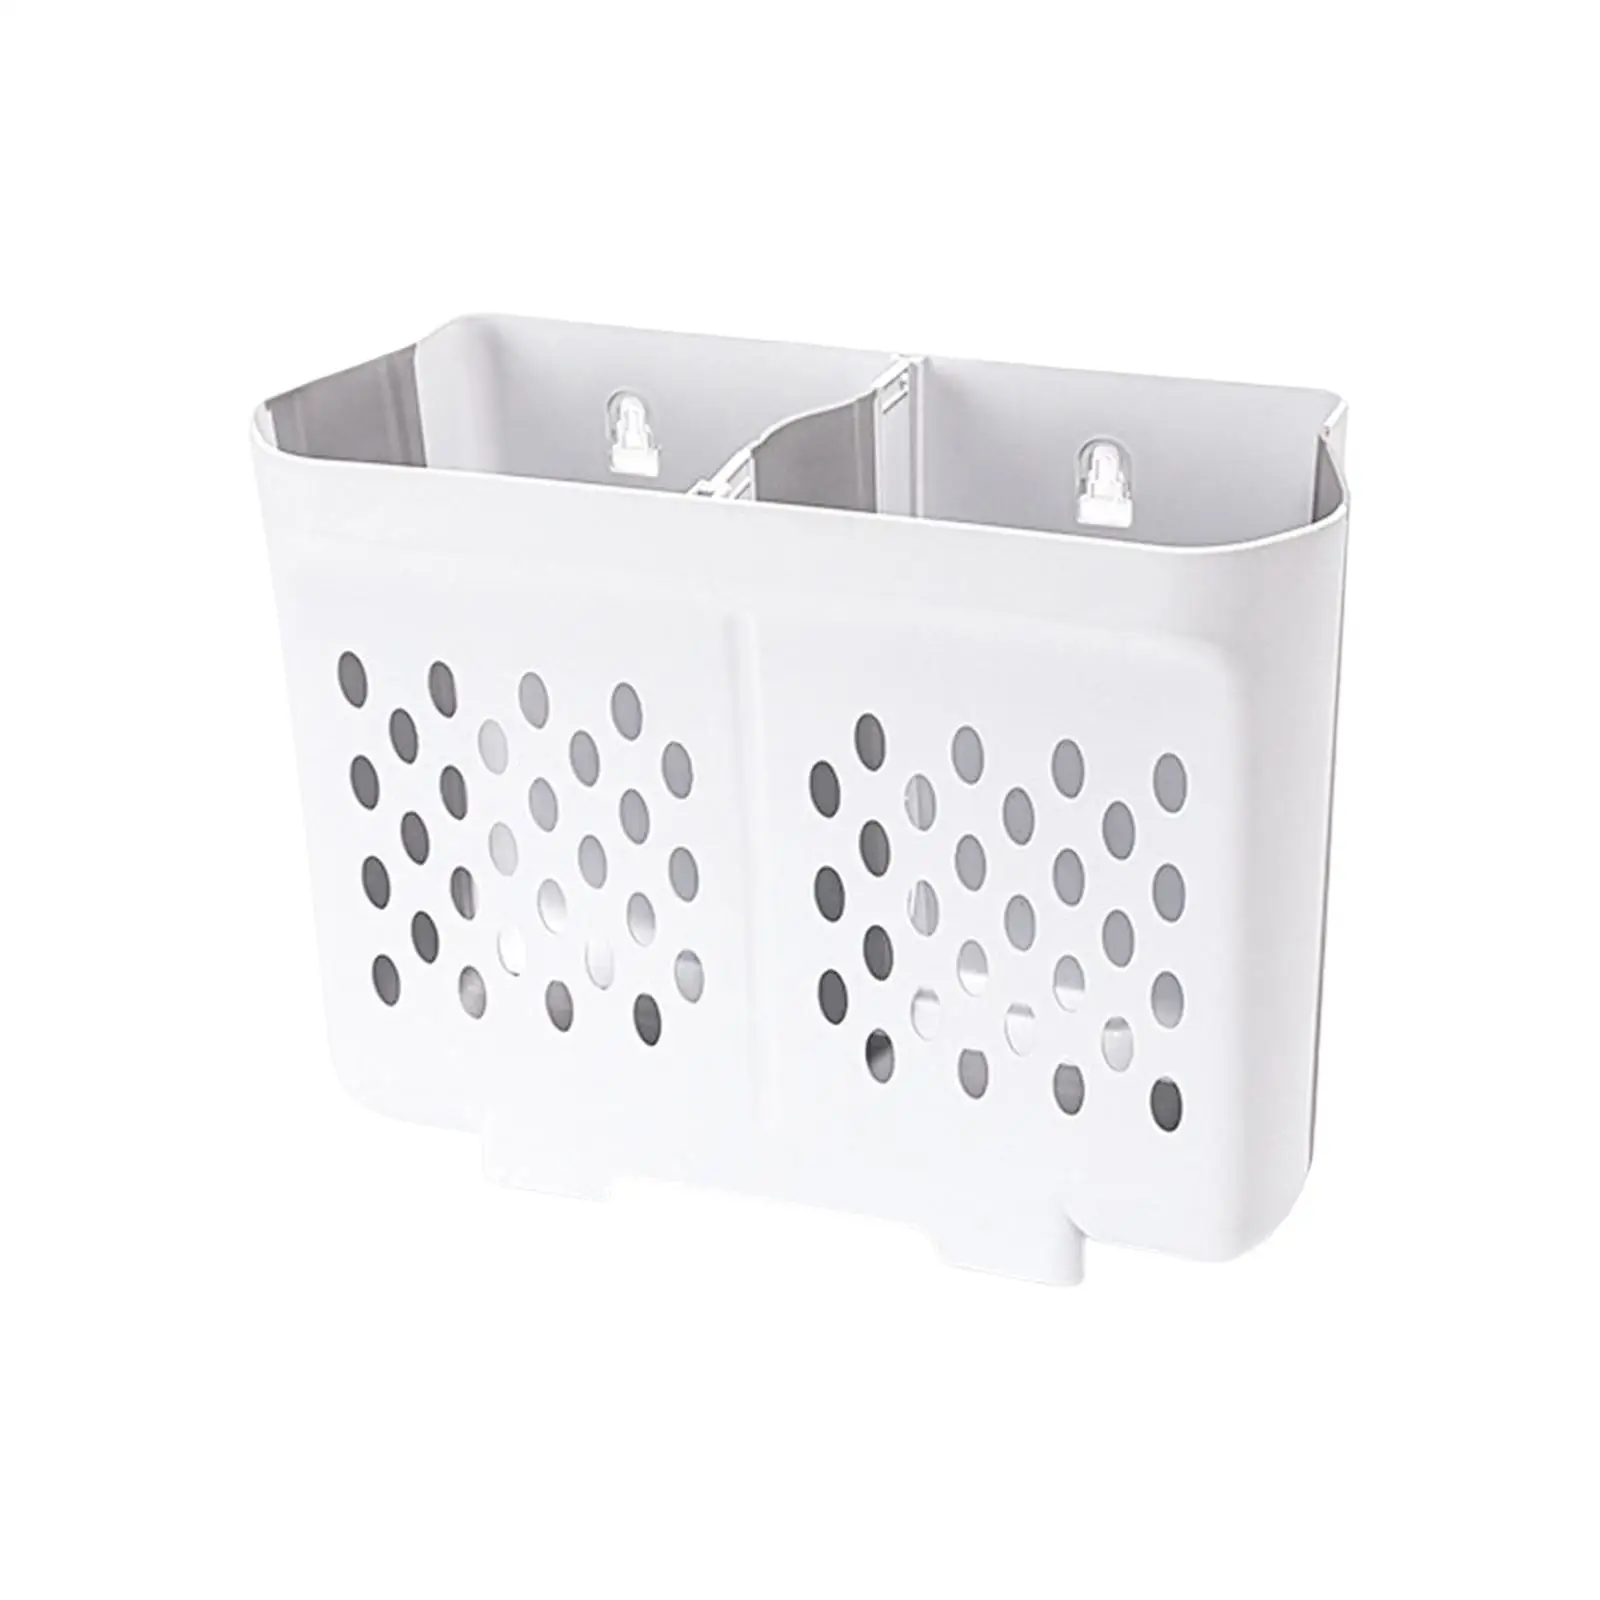 Household Foldable Laundry Hamper Organizer Hanging Hollowed Out Durable for Apartments, Hotel Use, Utility Room Sturdy